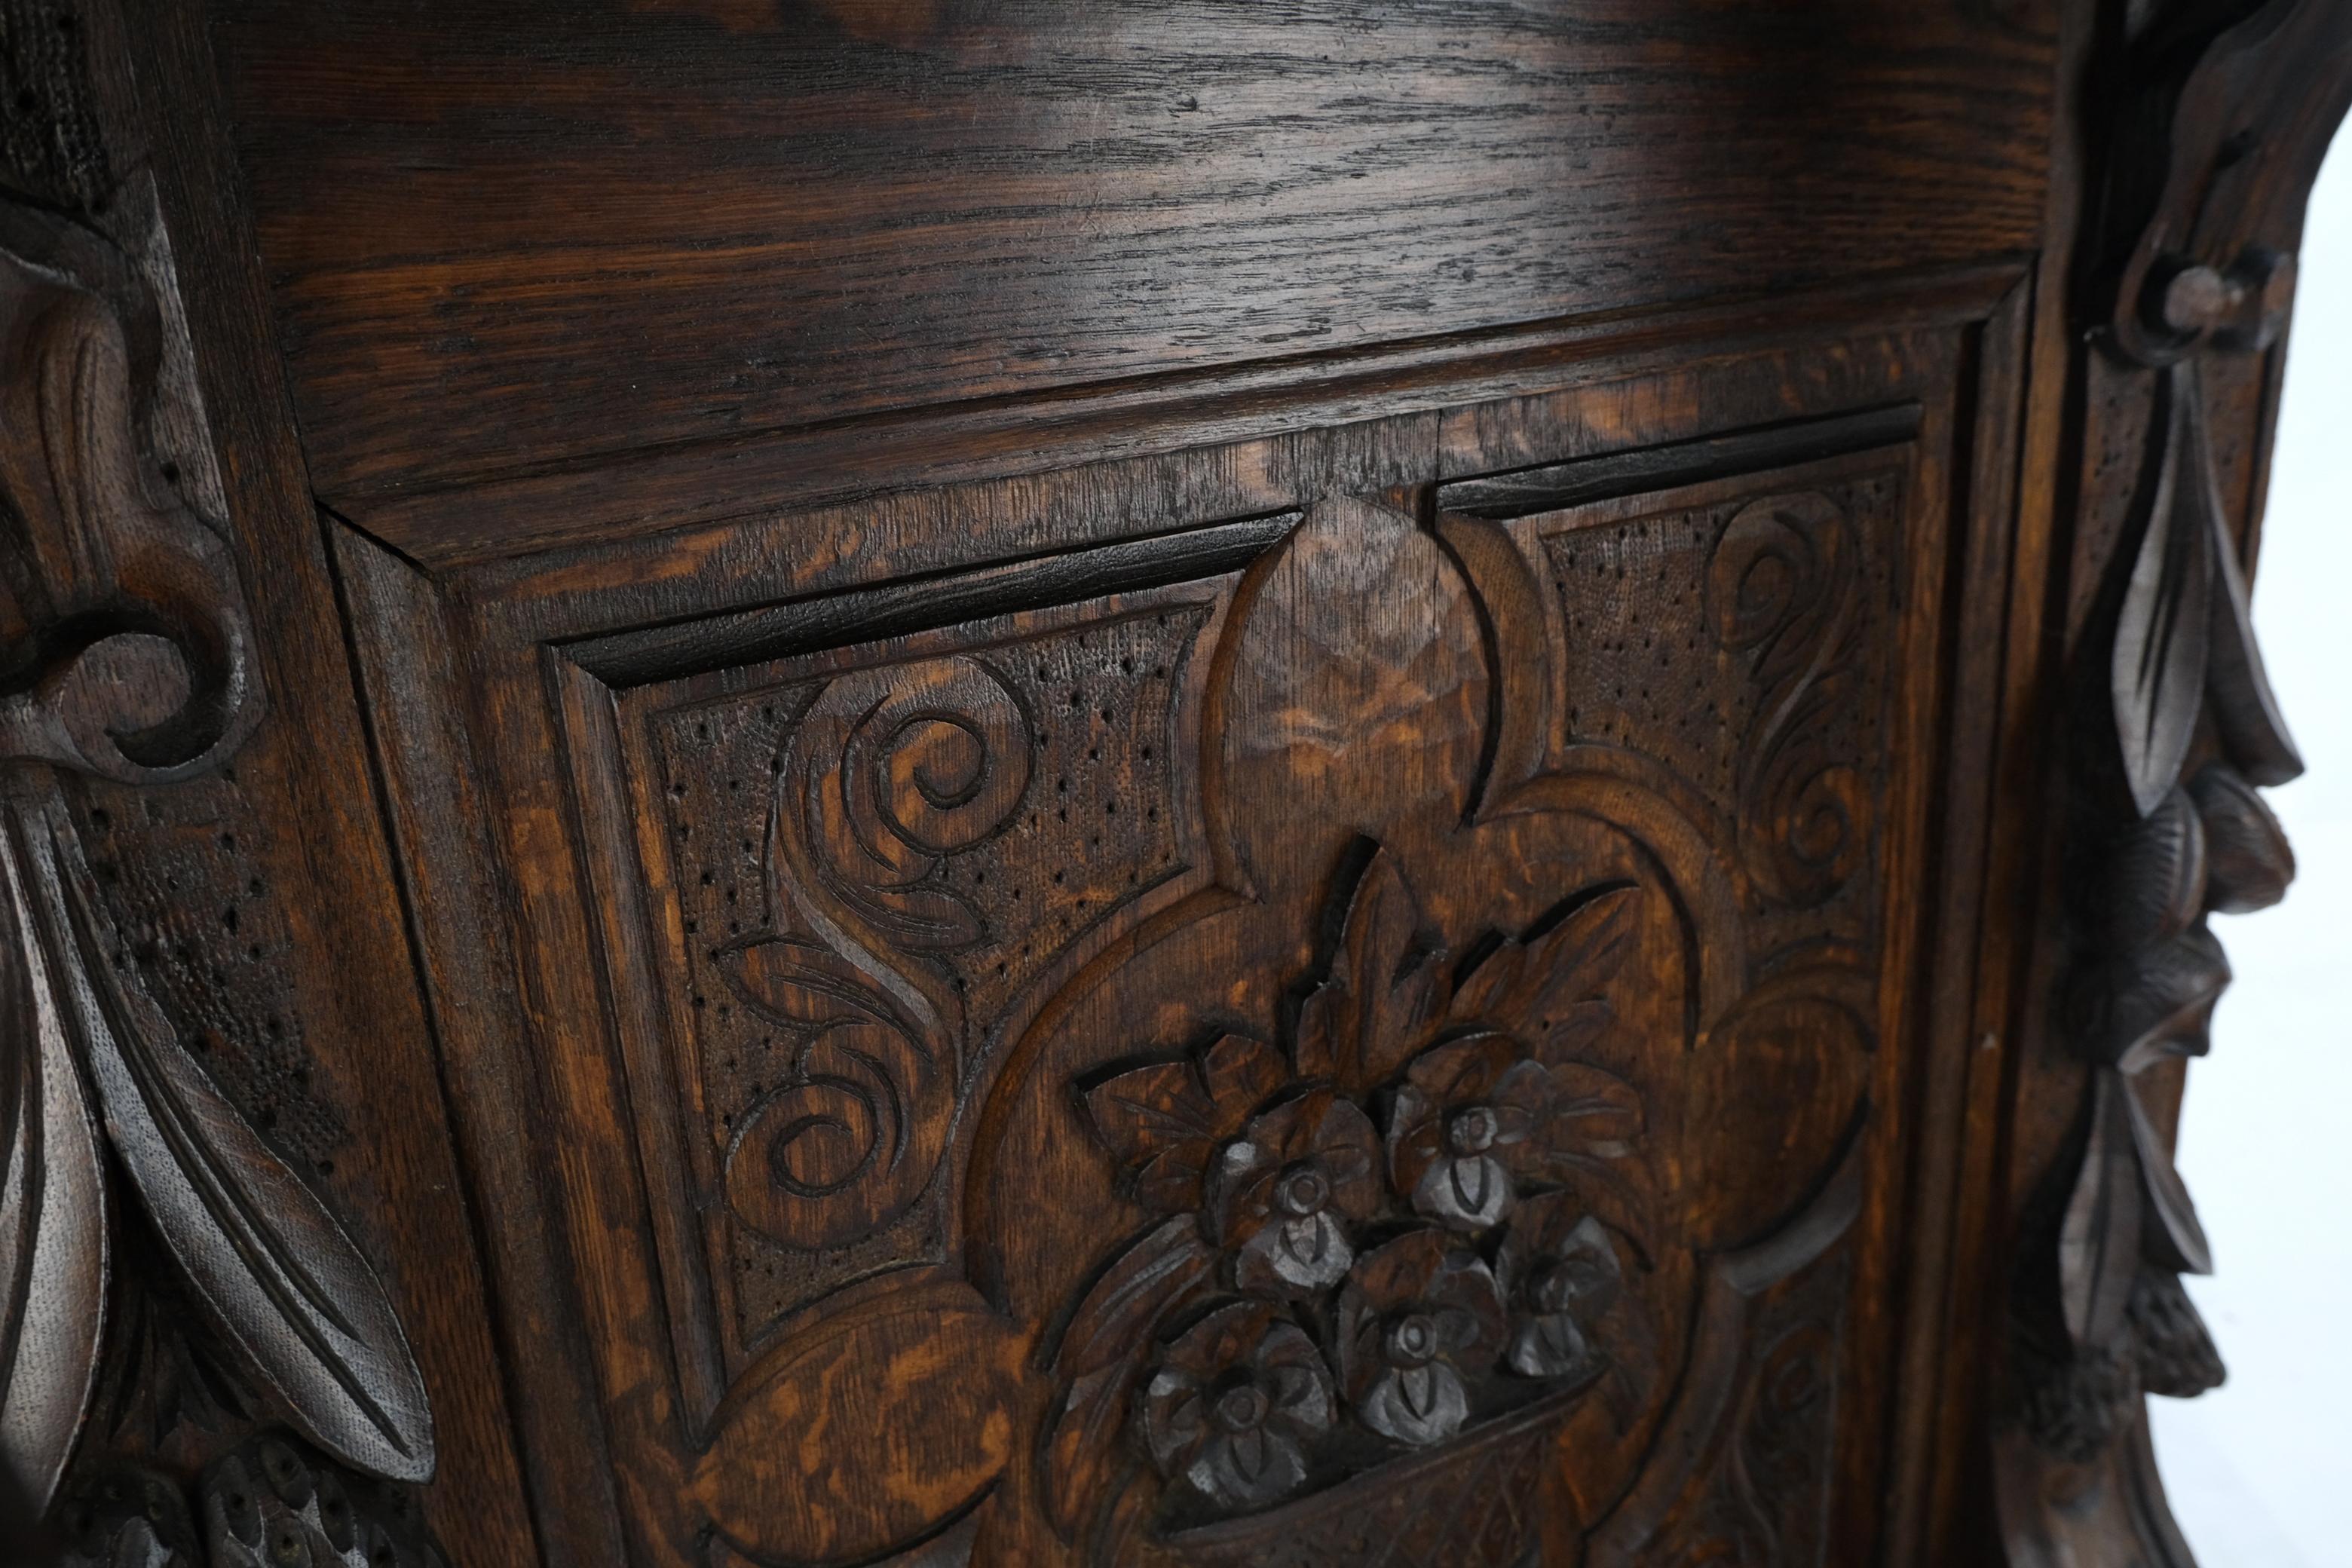 19th Century Davenport Heavily Carved Oak Desk w/ Rope Twist Supports 4 Drawers For Sale 8